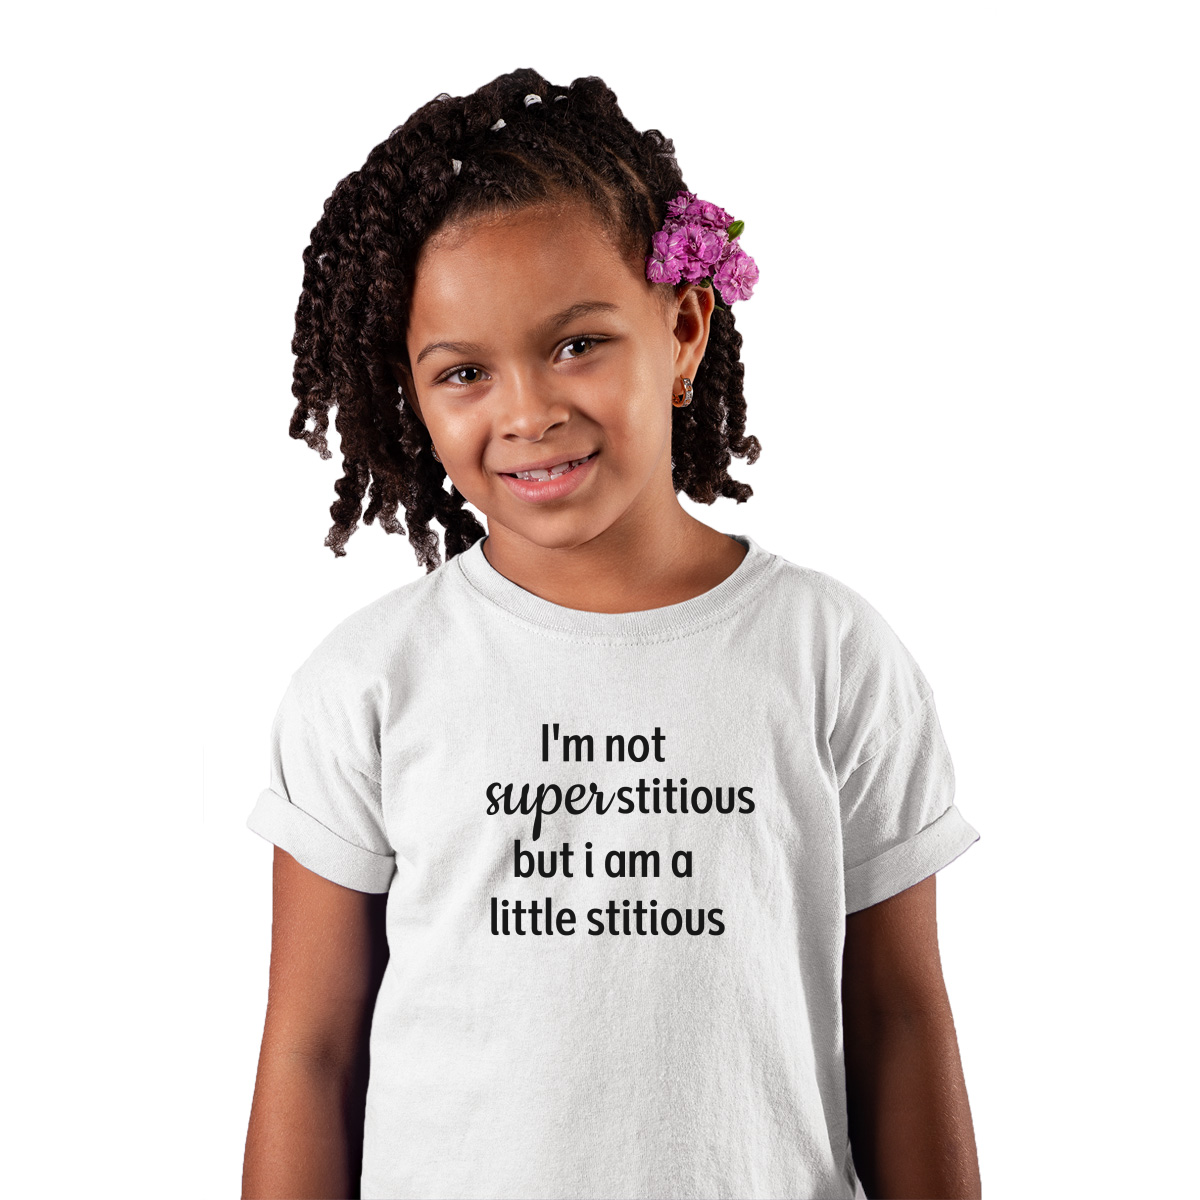 I'm Not Superstitious but I am a Little Stitious Kids T-shirt | White